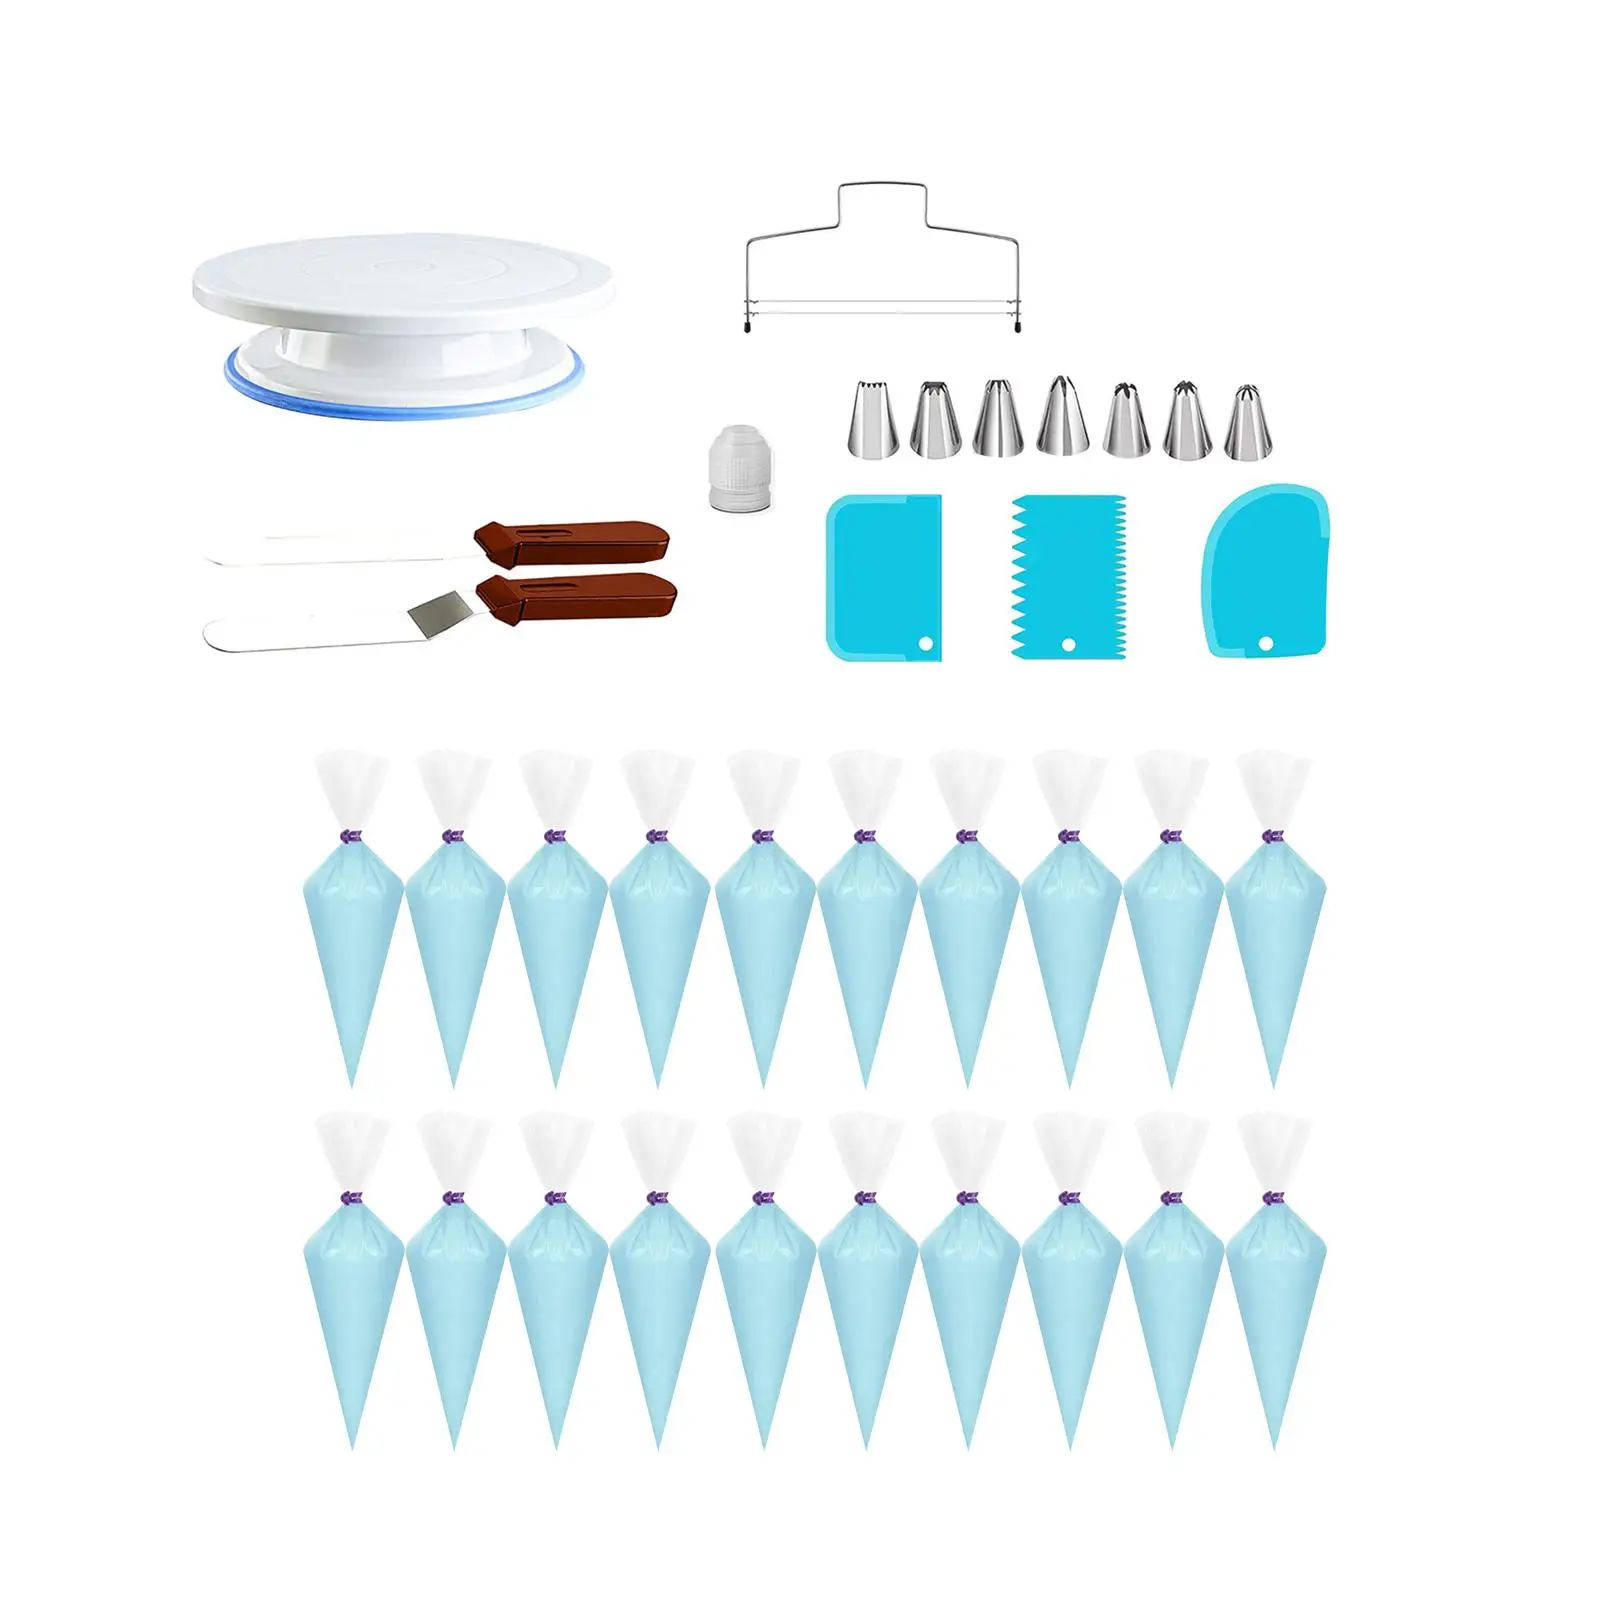 35Pcs DIY Cake Decorating Bakery Tools Kit Cake Baking Supplies Tools Kits Cake Turntable Nozzle Set for Home Cookies Beginners